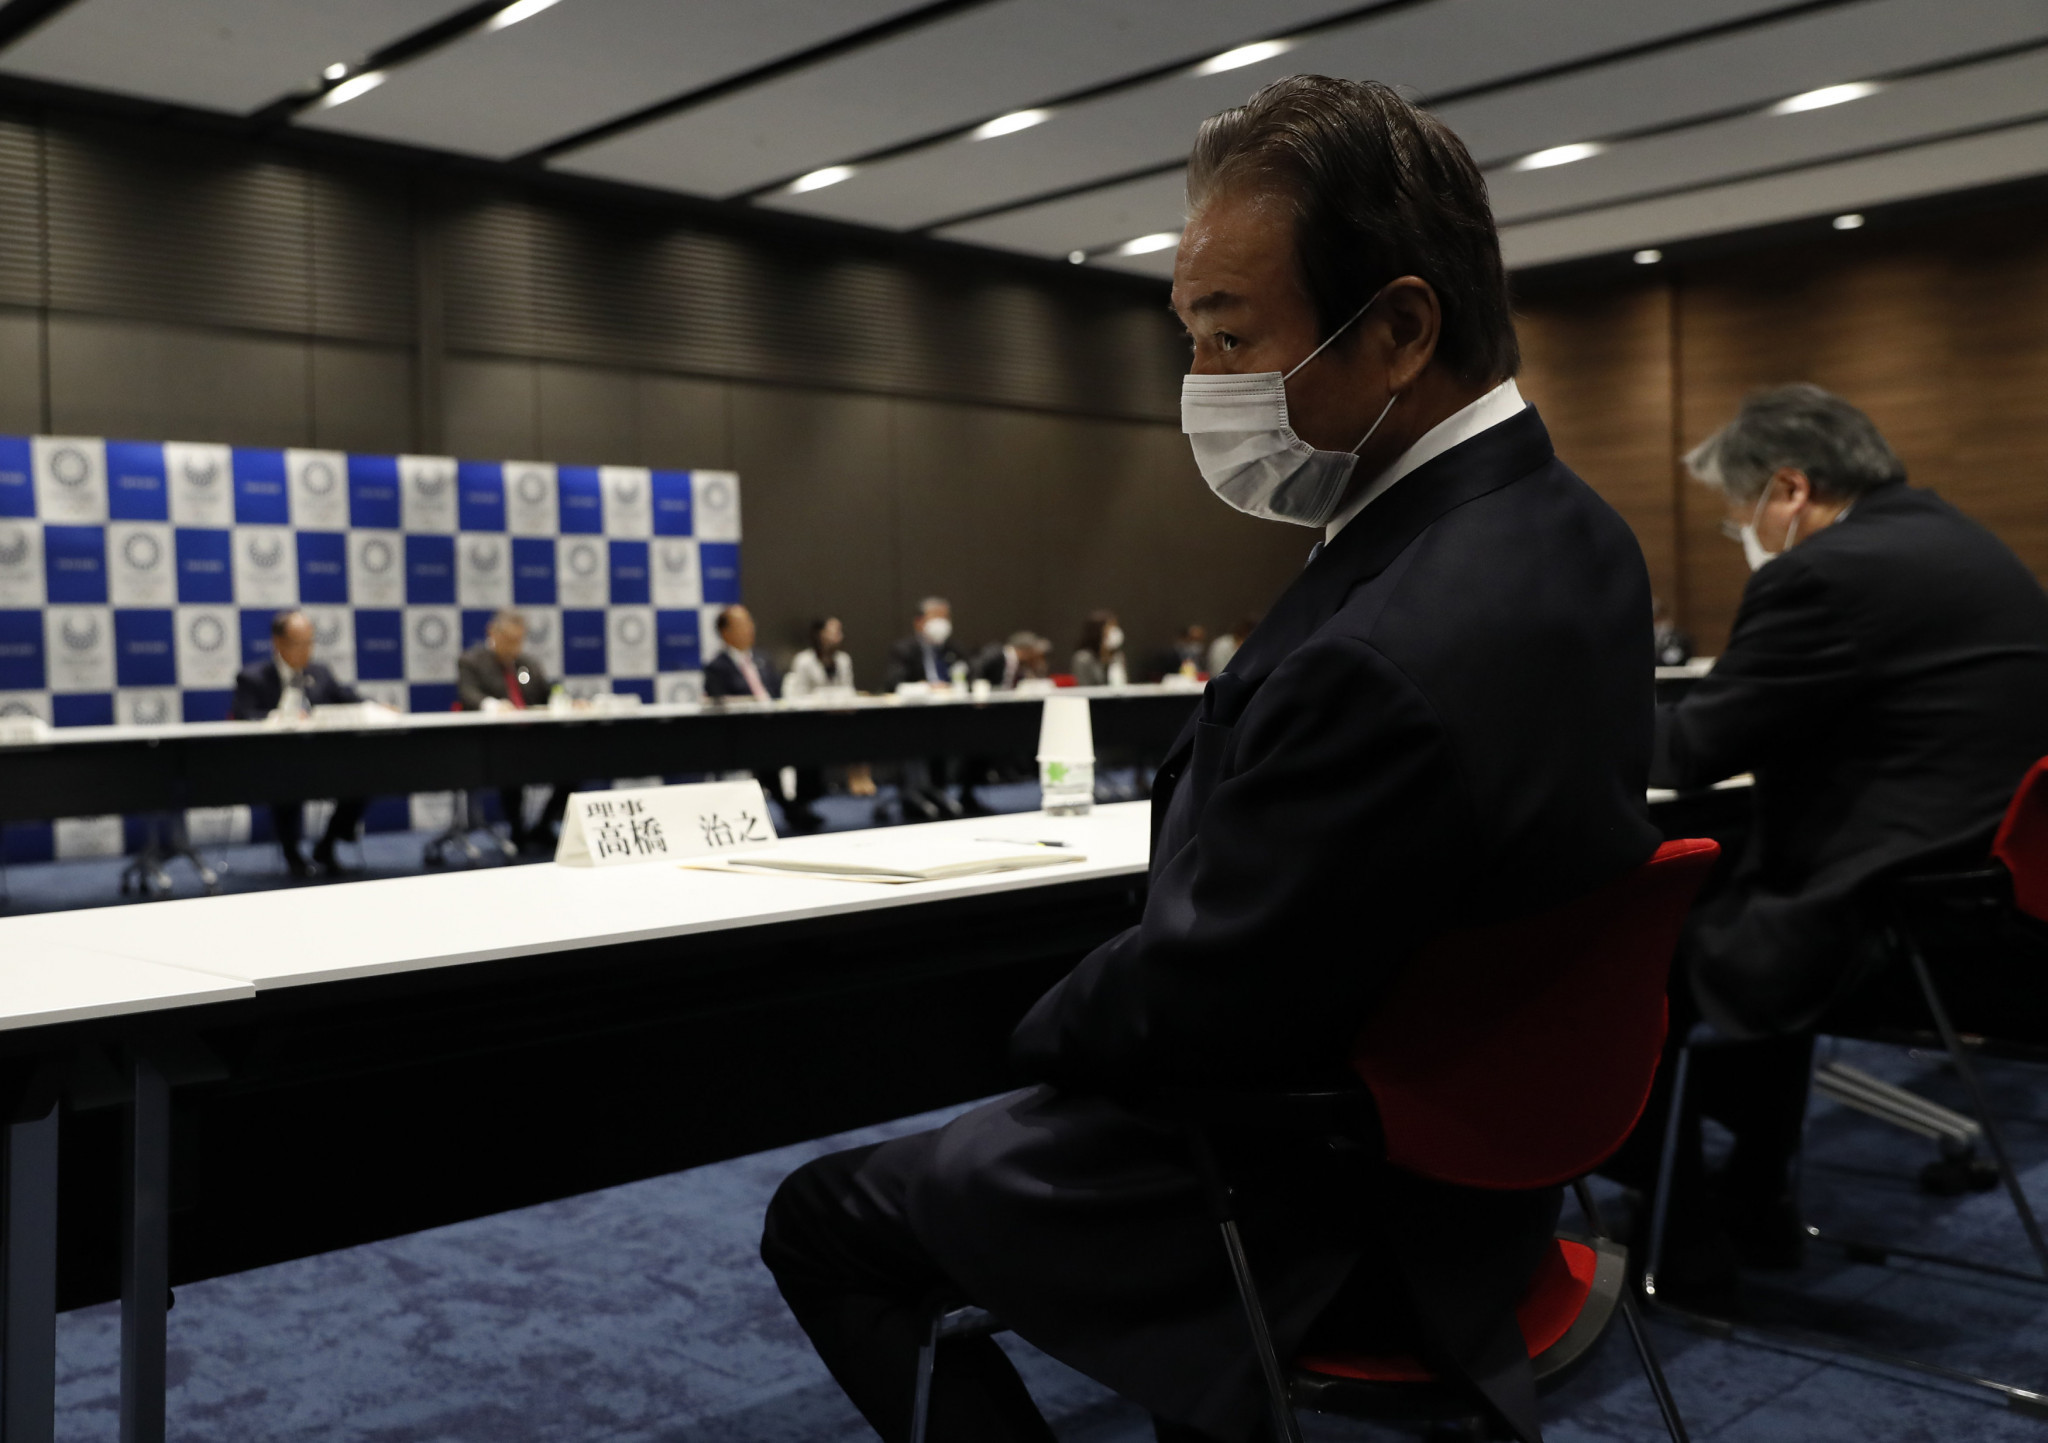 Home of Tokyo 2020 Executive Board member raided in corruption investigation